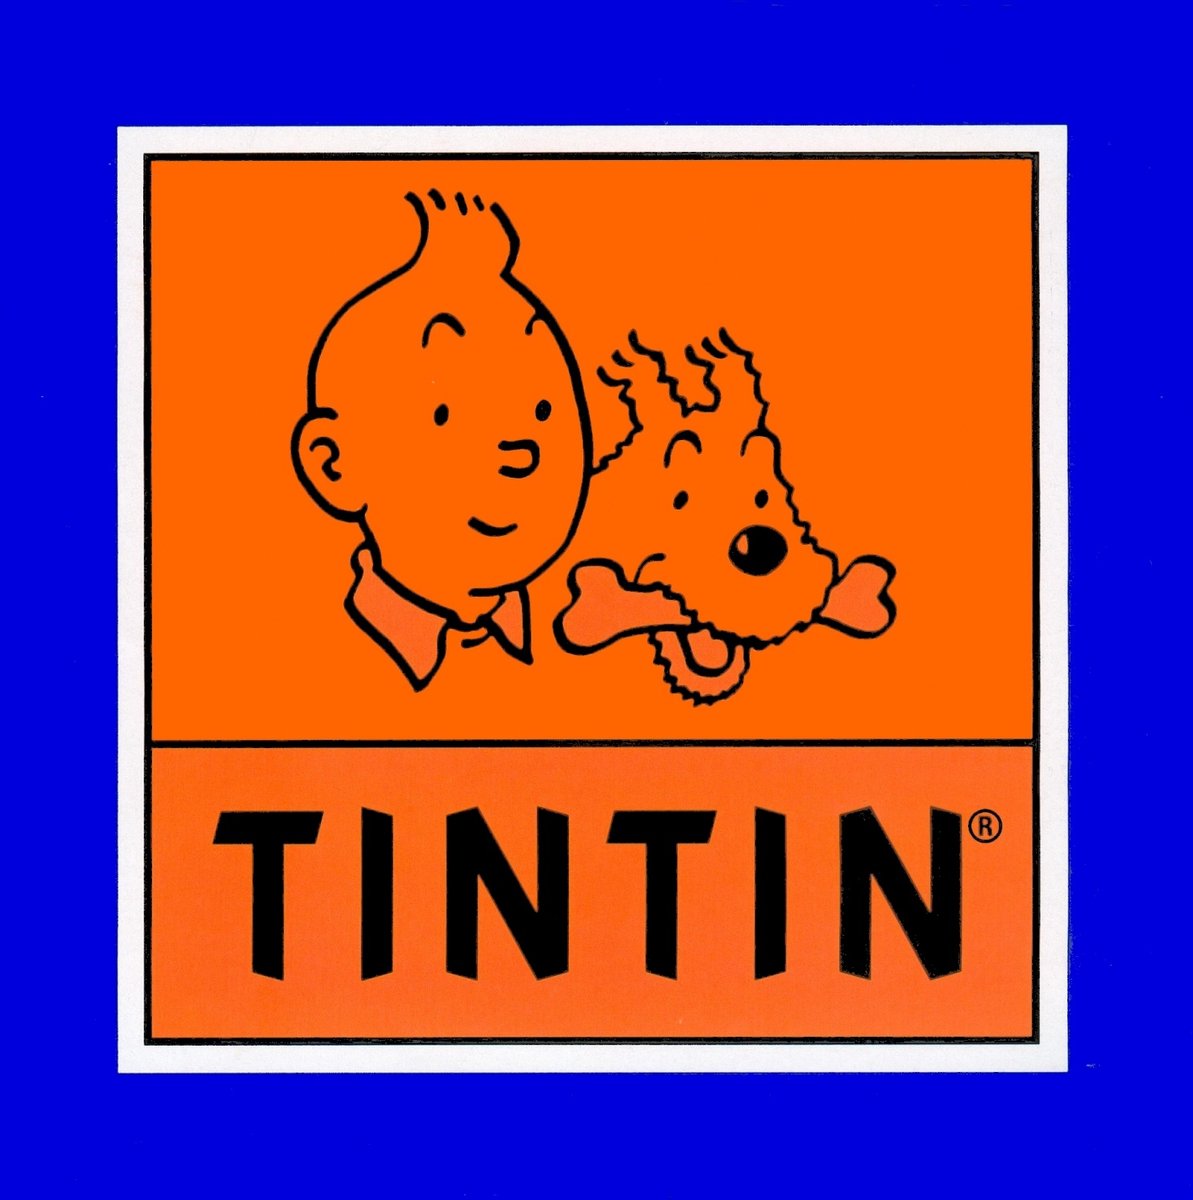 Comic Book Tintin (The Tintin Archives) au Pays des Soviets - FRENCH edition Tintin Comic by Moulinsart - au pays des soviets, comic, kuifje, stripboek, Titin - Gadgetz Home